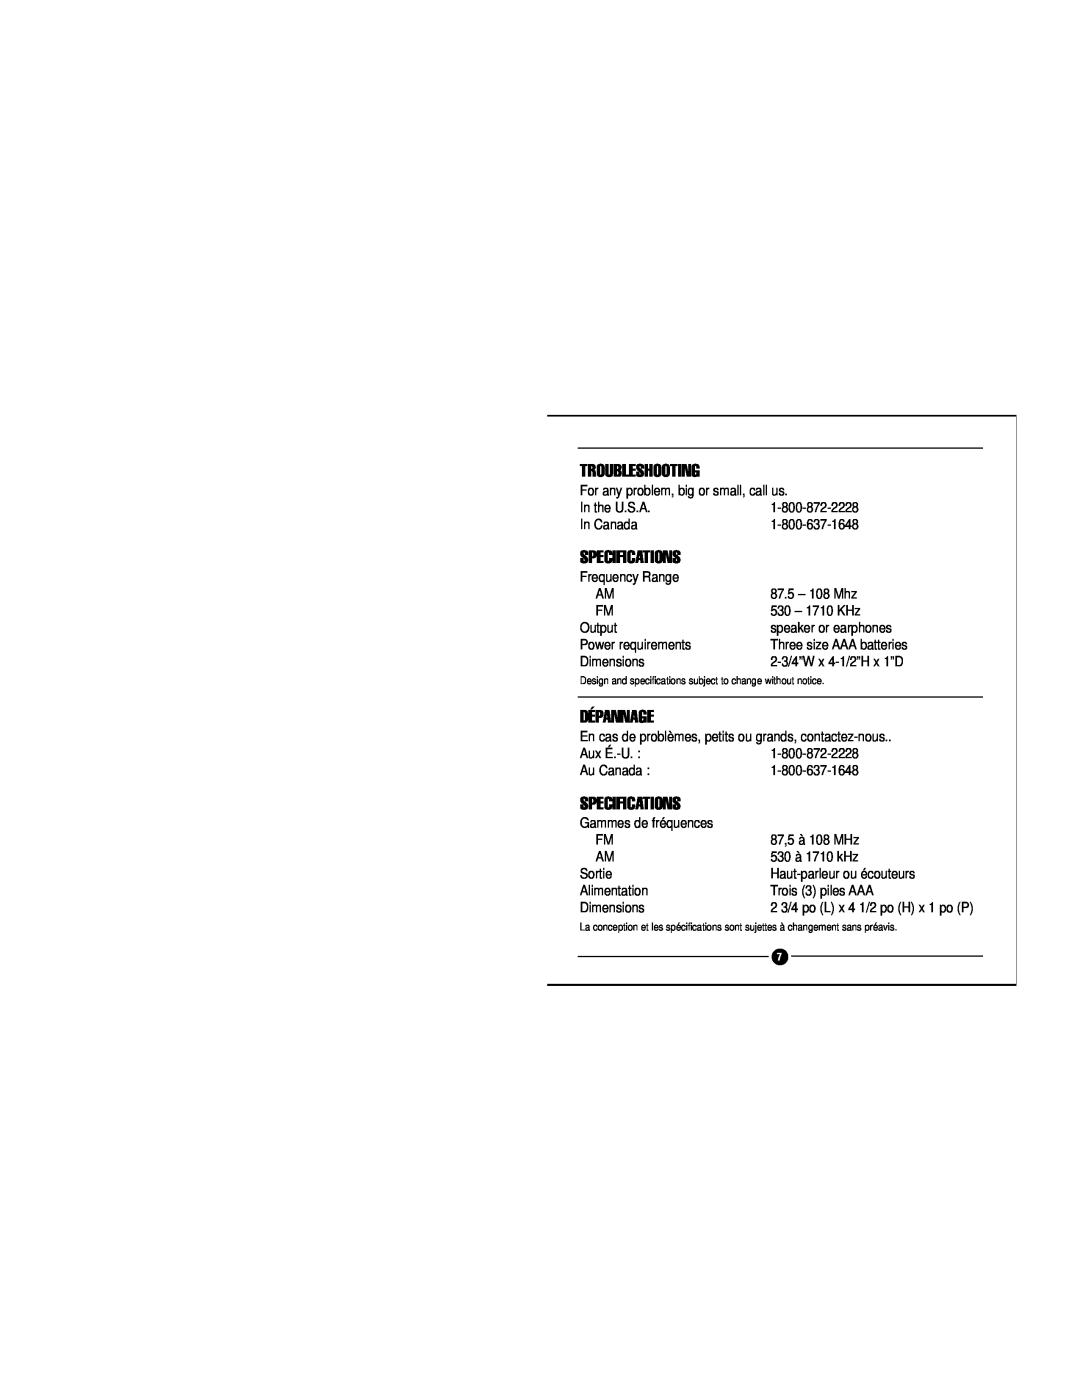 Grundig Weather/AM/FM Radio manual Troubleshooting, Specifications, Dépannage 